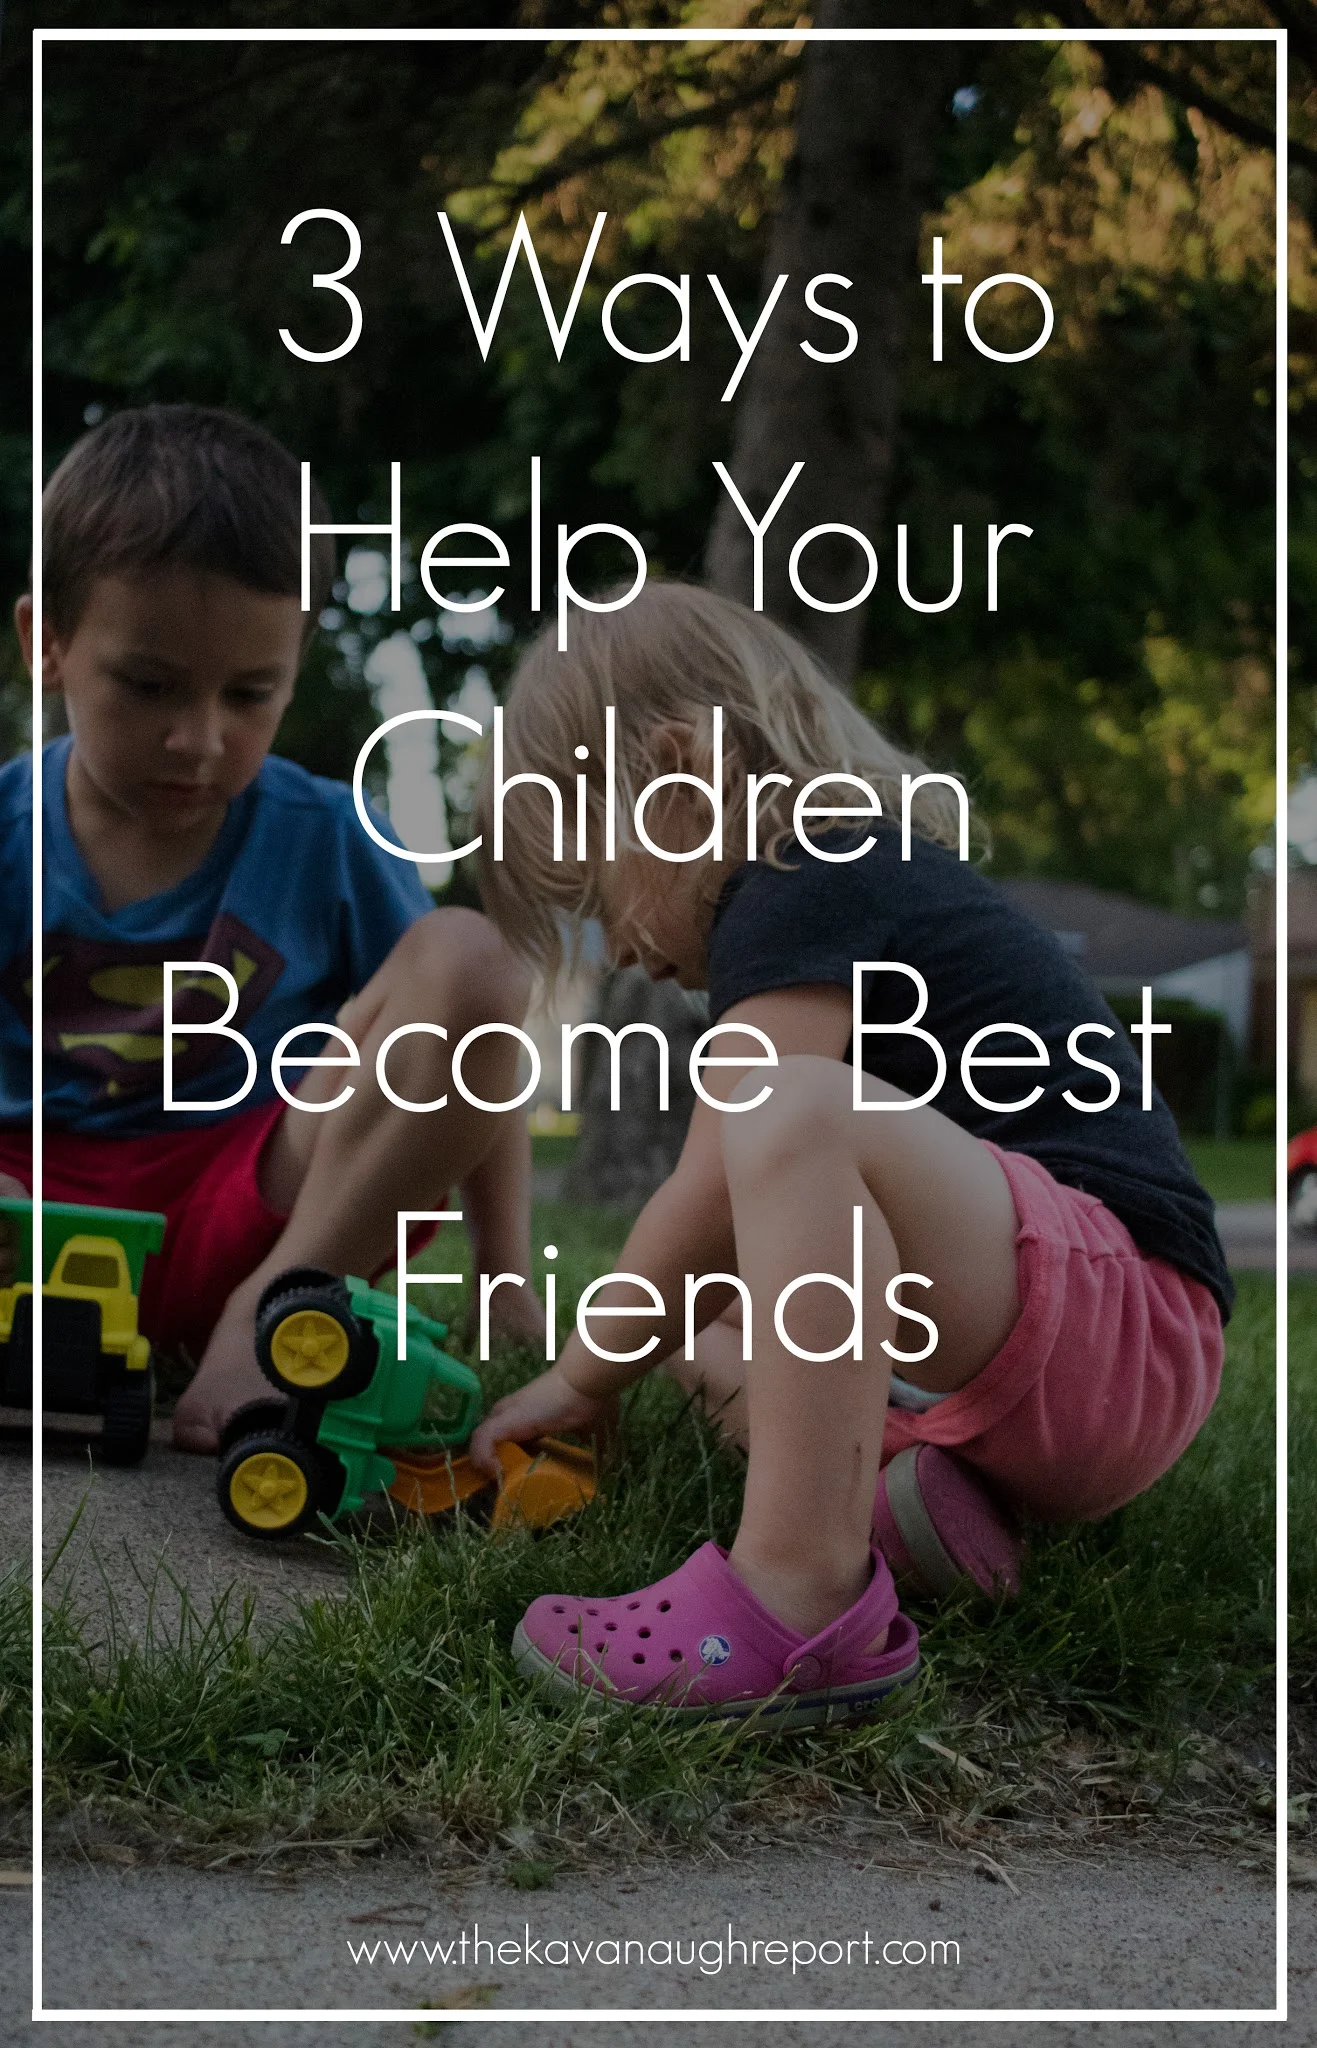 Siblings can be good friends, they can even be best friends. Here are 3 ways to help your children become best friends.